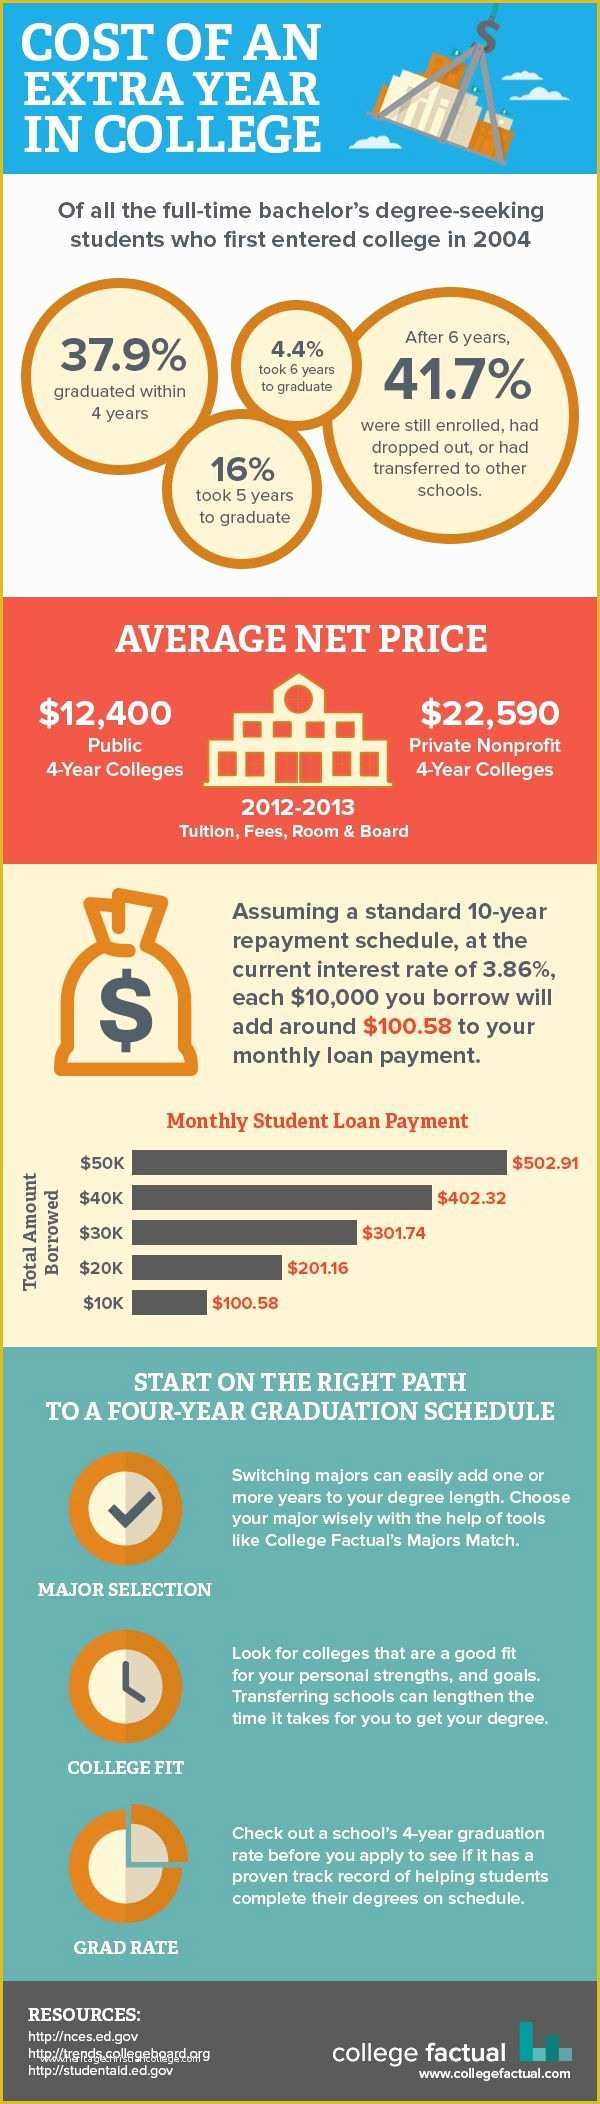 Free Infographic Templates for Students Of 143 Best Images About College Infographics On Pinterest